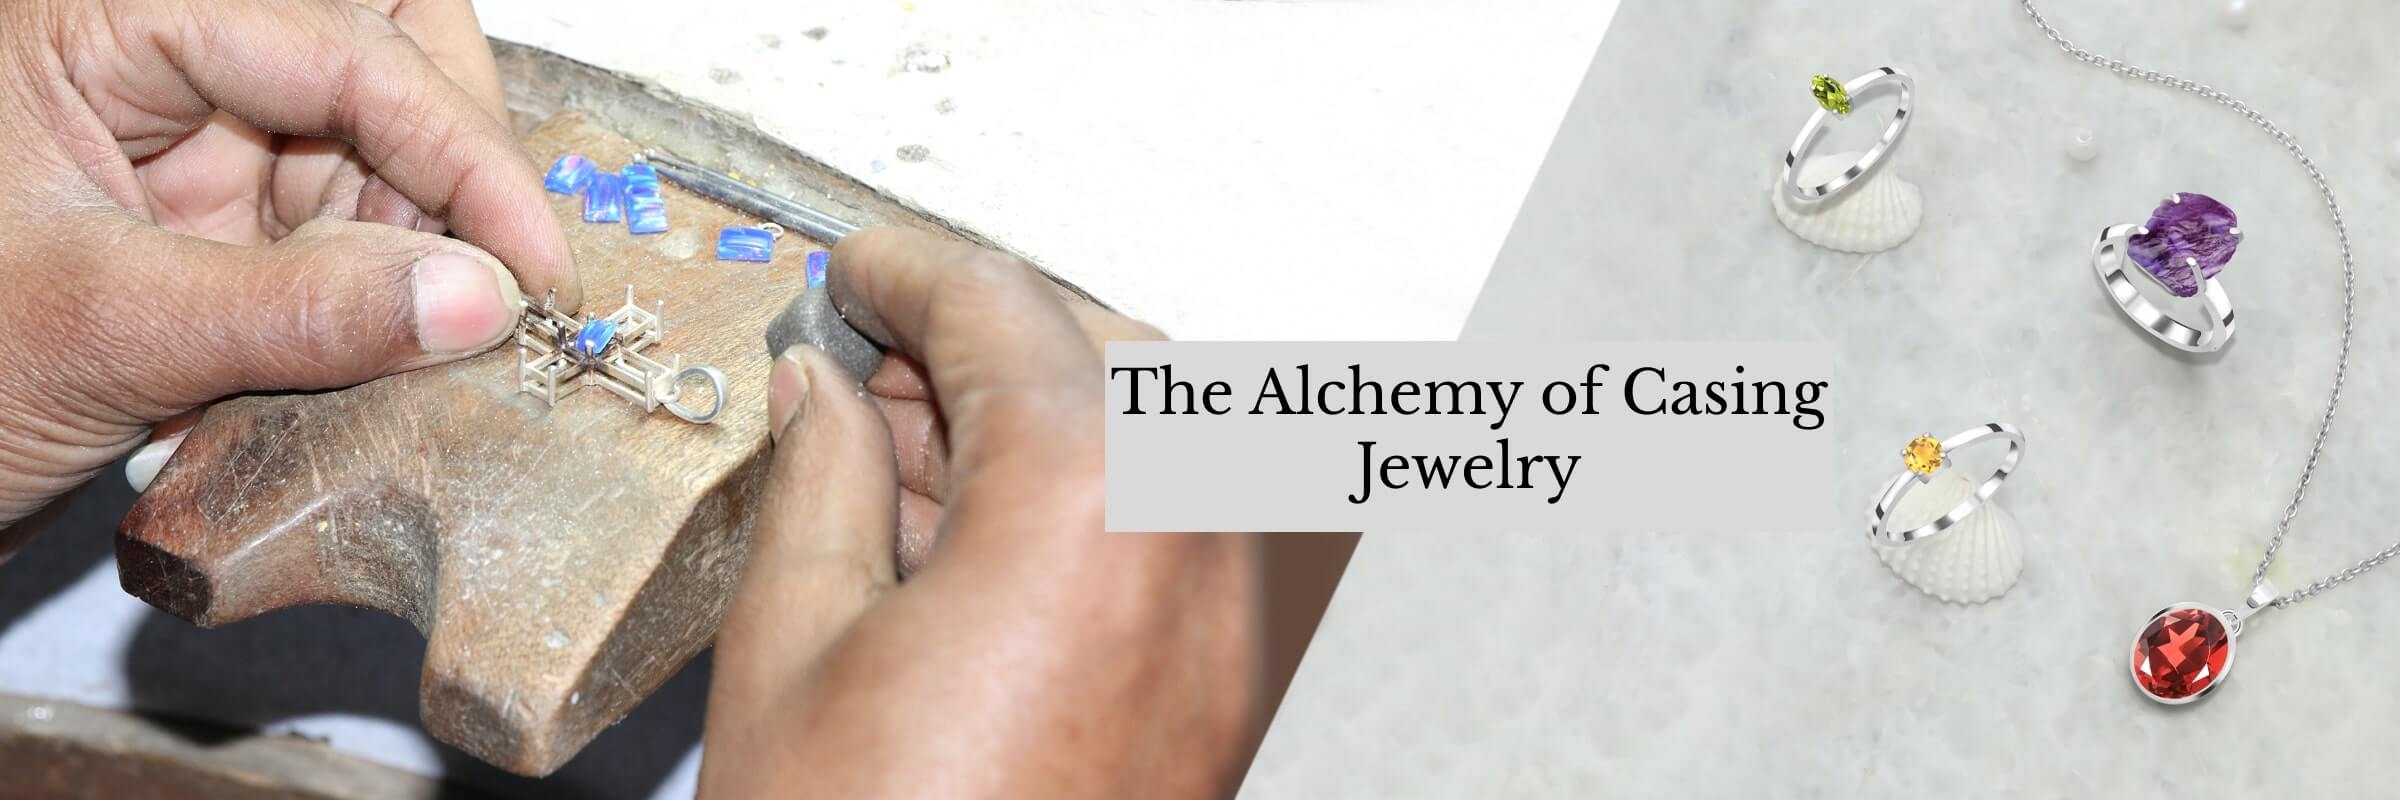 Materials Used in Casing Jewelry